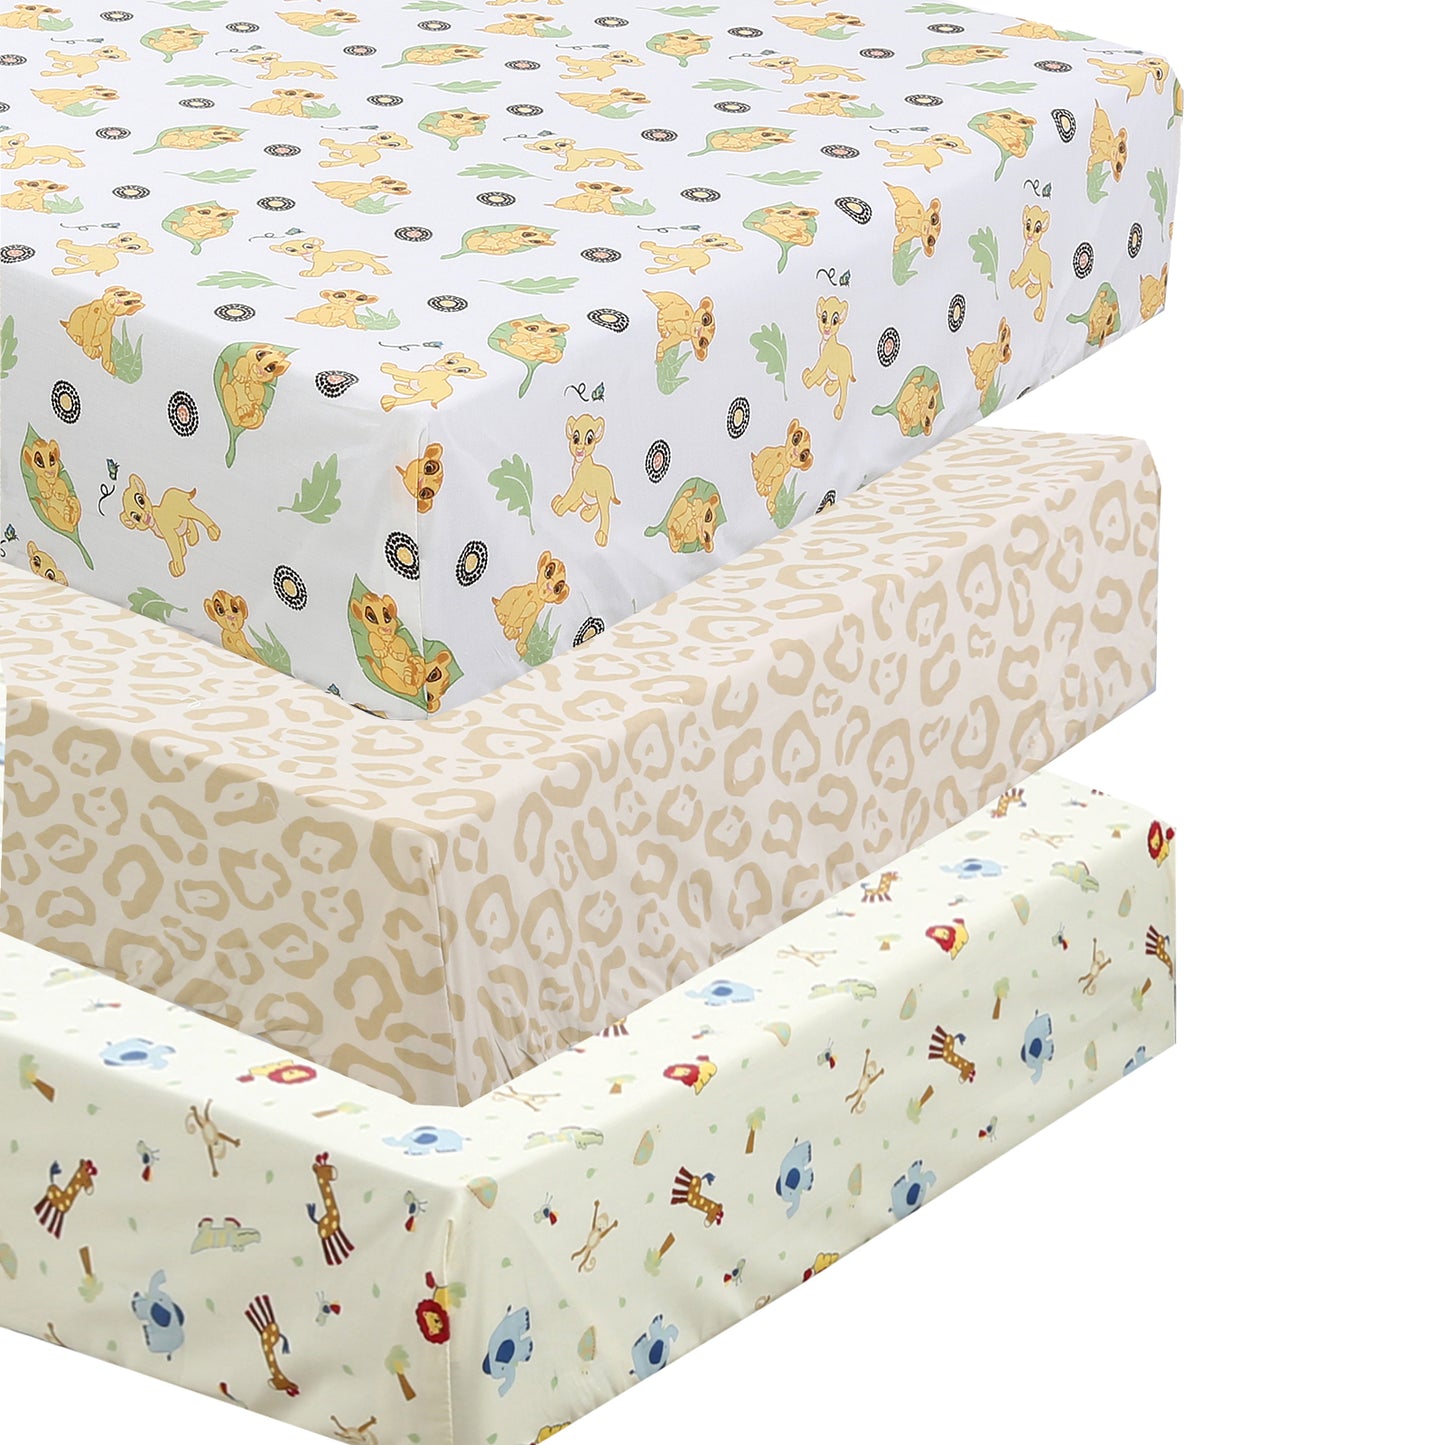 3 Piece Crib/Toddler Cotton Fitted Sheets Colorful Brown Yellow Tan Wild Animal Print Lion King Simba & Jungle Friends